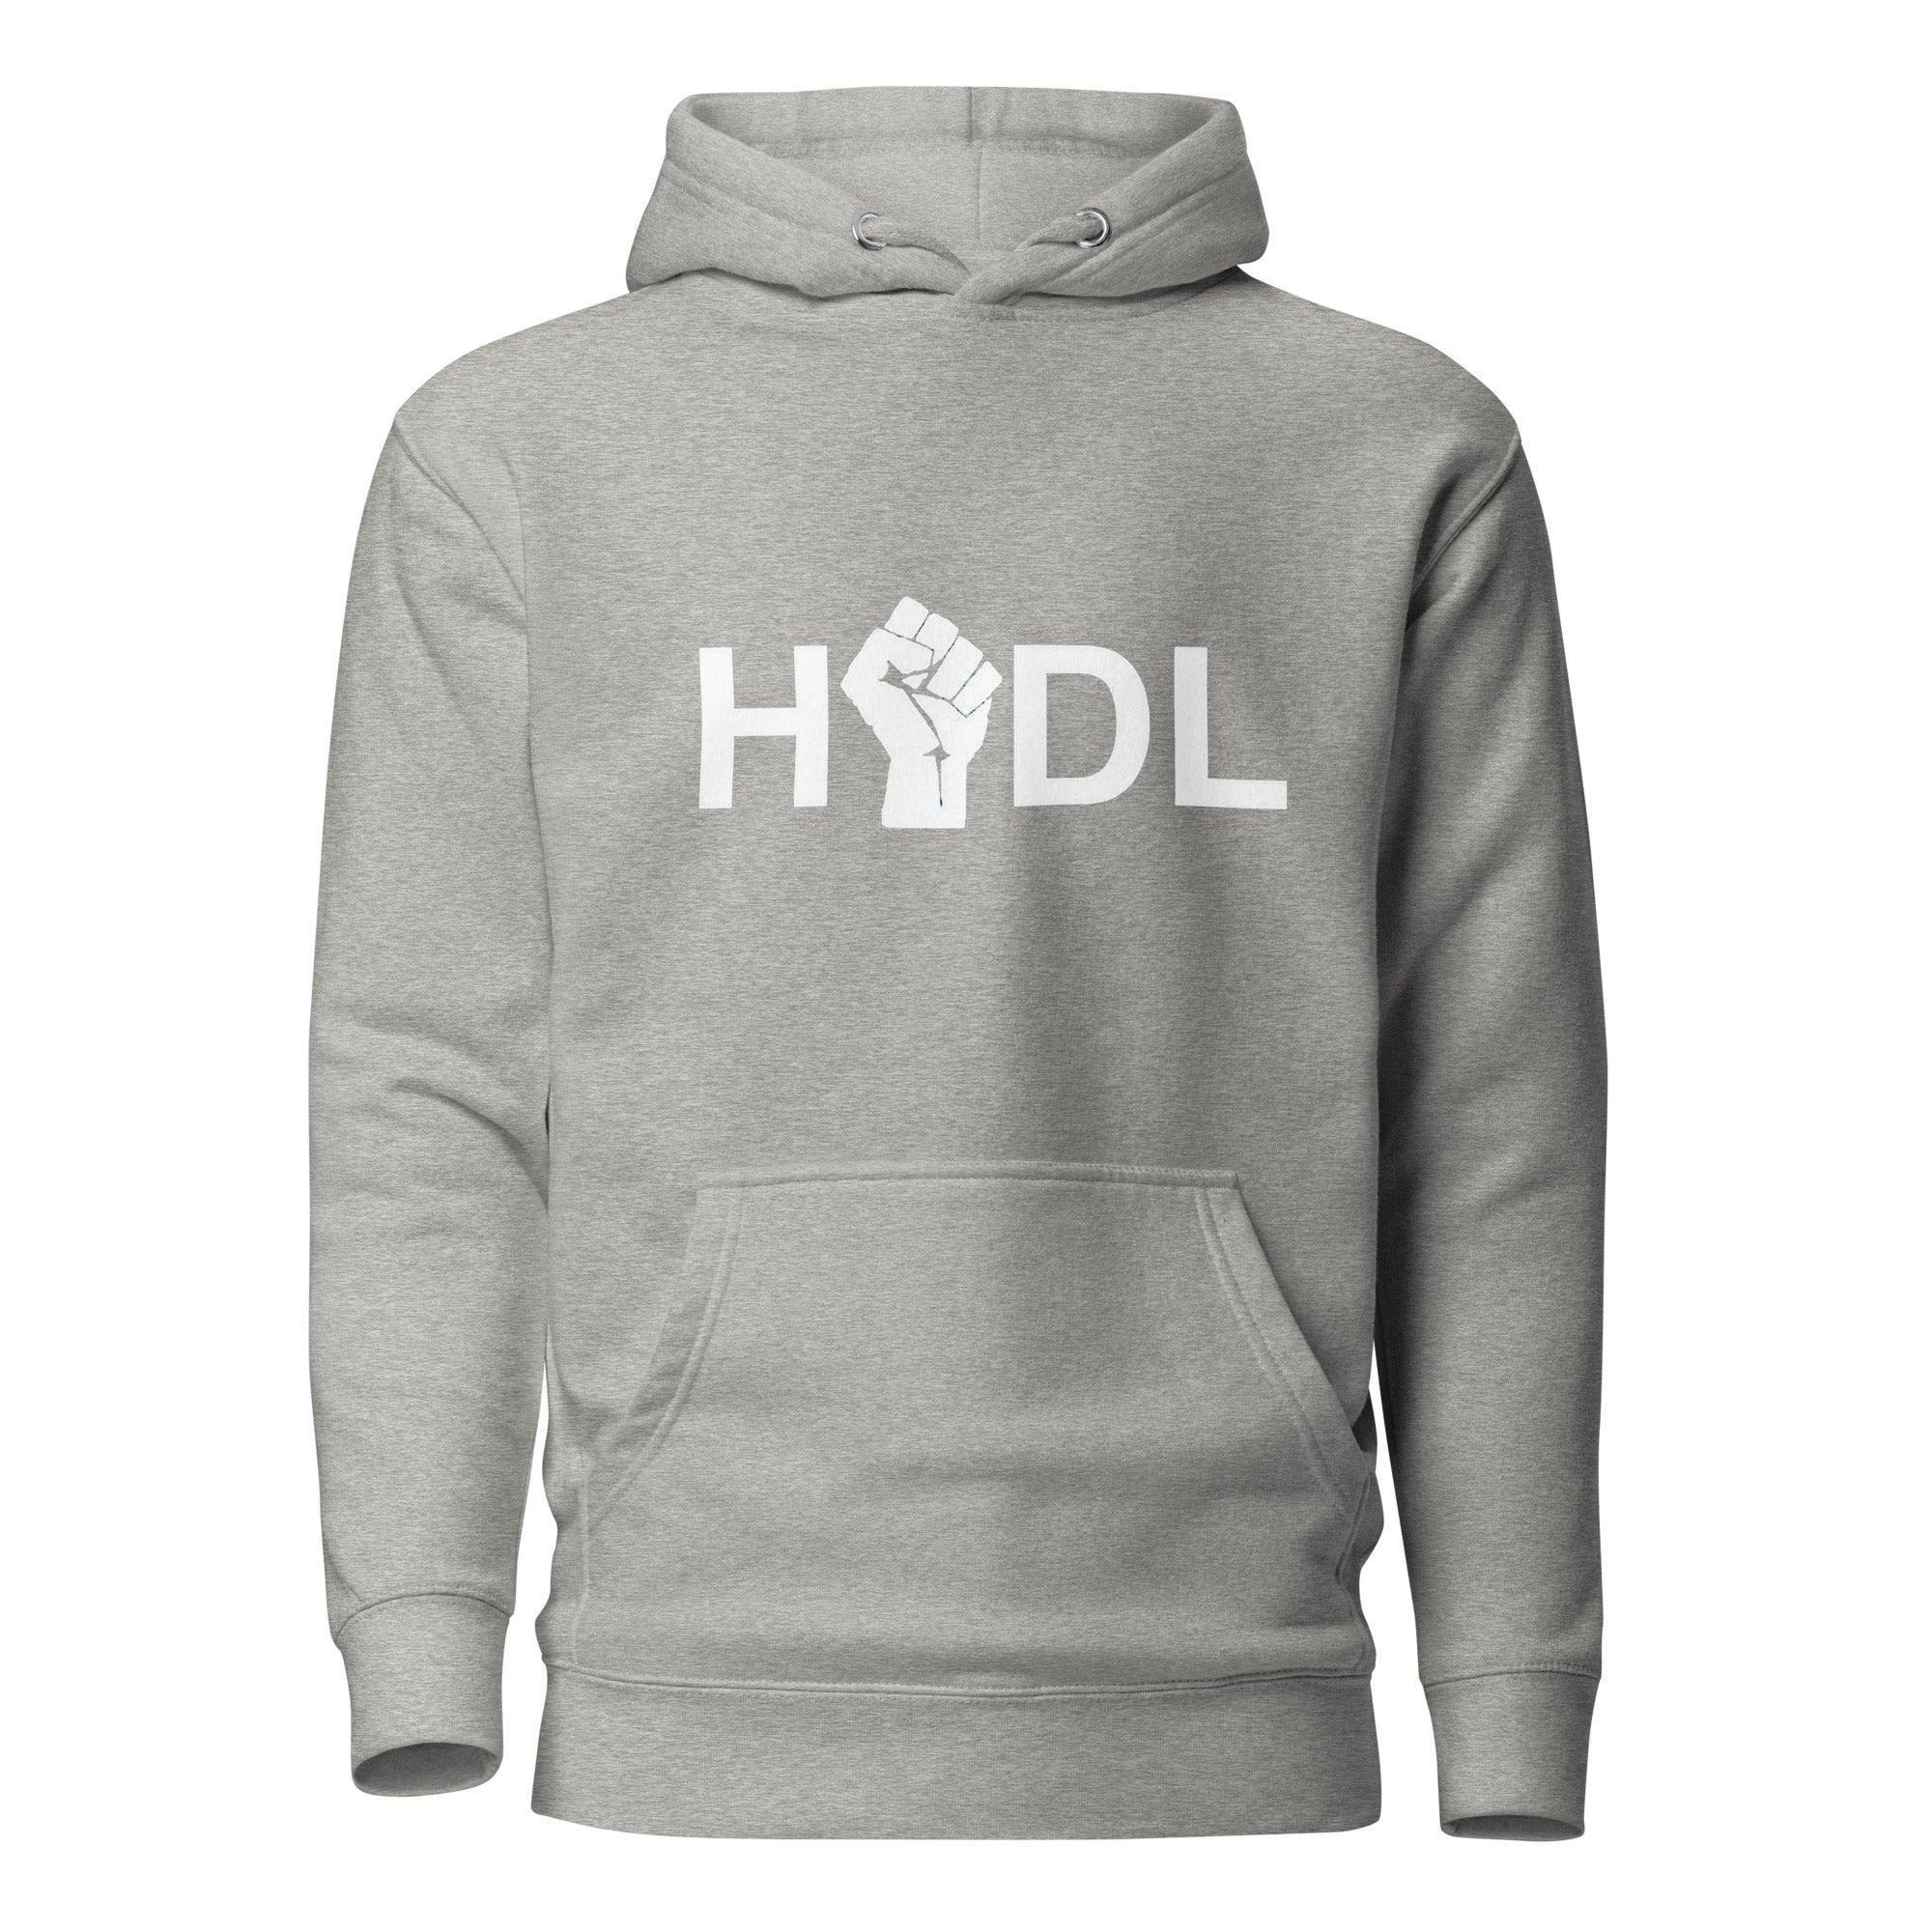 HODL Strong Pullover Hoodie - InvestmenTees